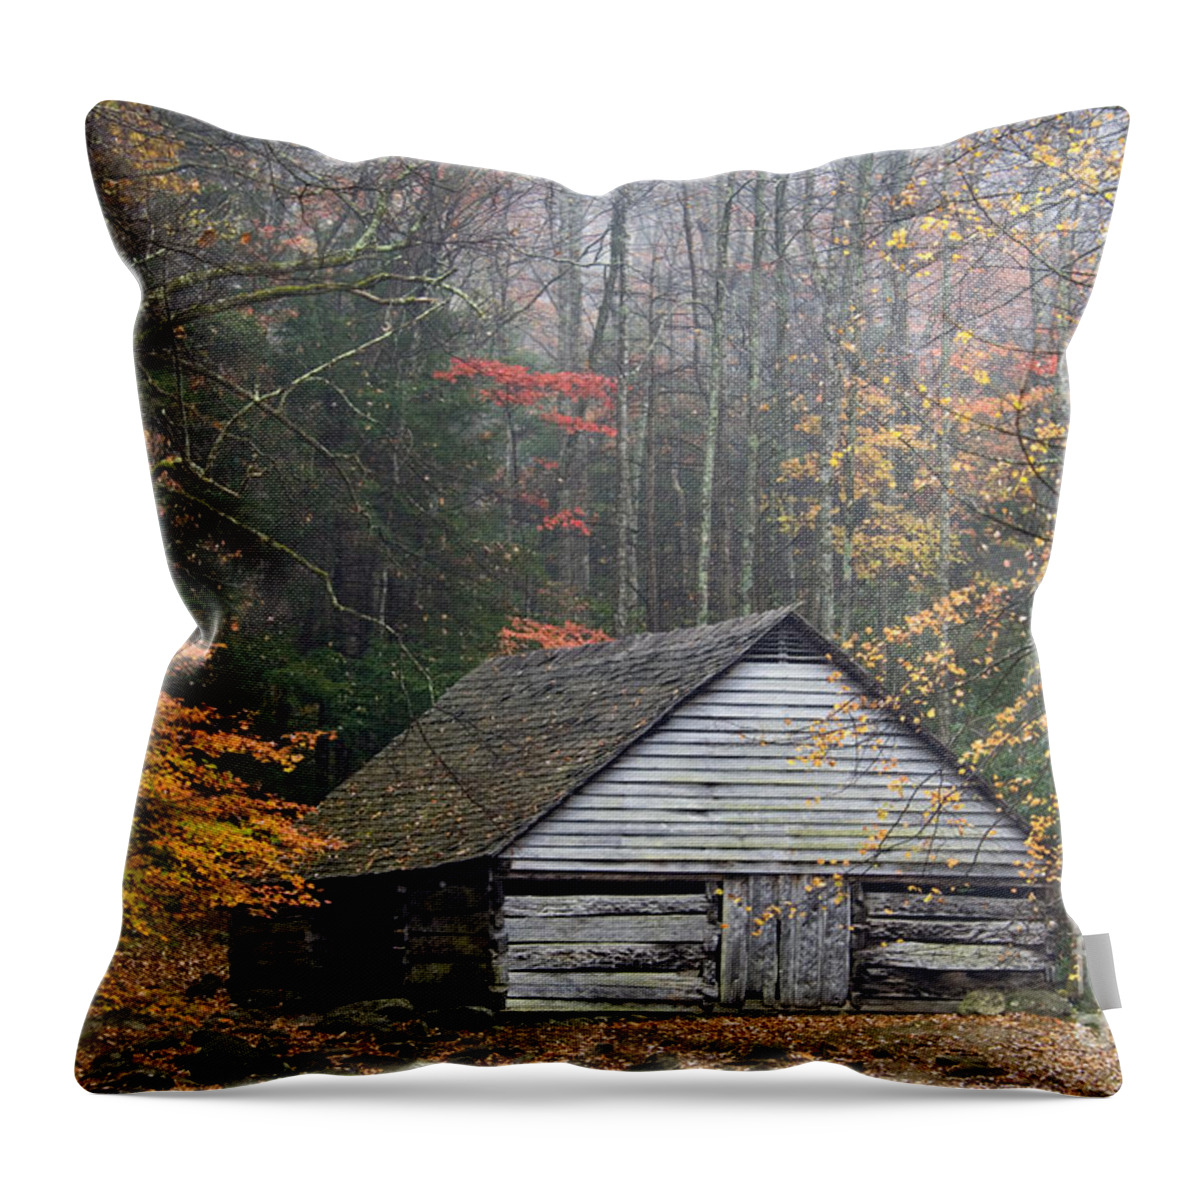 Noah Throw Pillow featuring the photograph Ogle Place - D008241 by Daniel Dempster